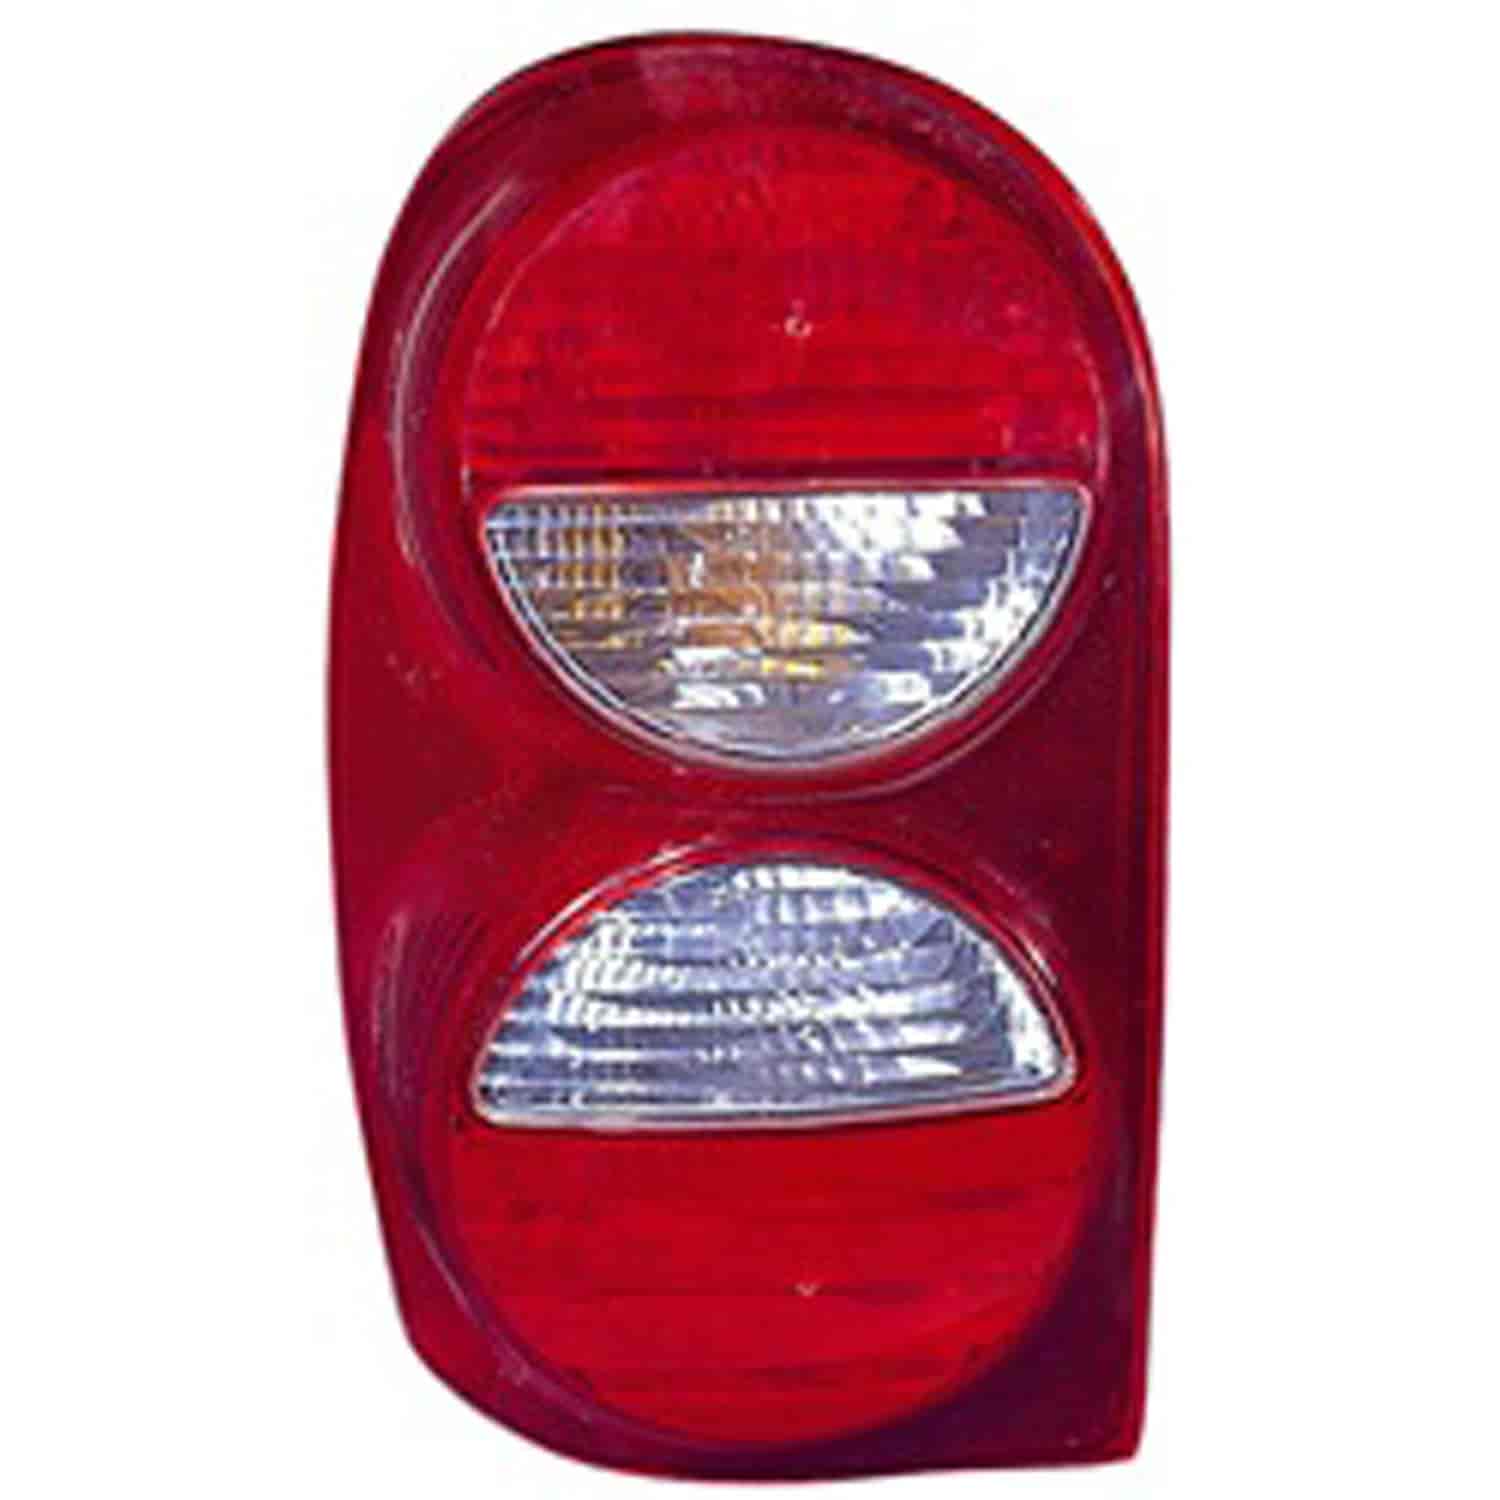 Replacement tail light assembly from Omix-ADA, Fits right side of 05-07 Jeep Liberty KJ without an air dam.